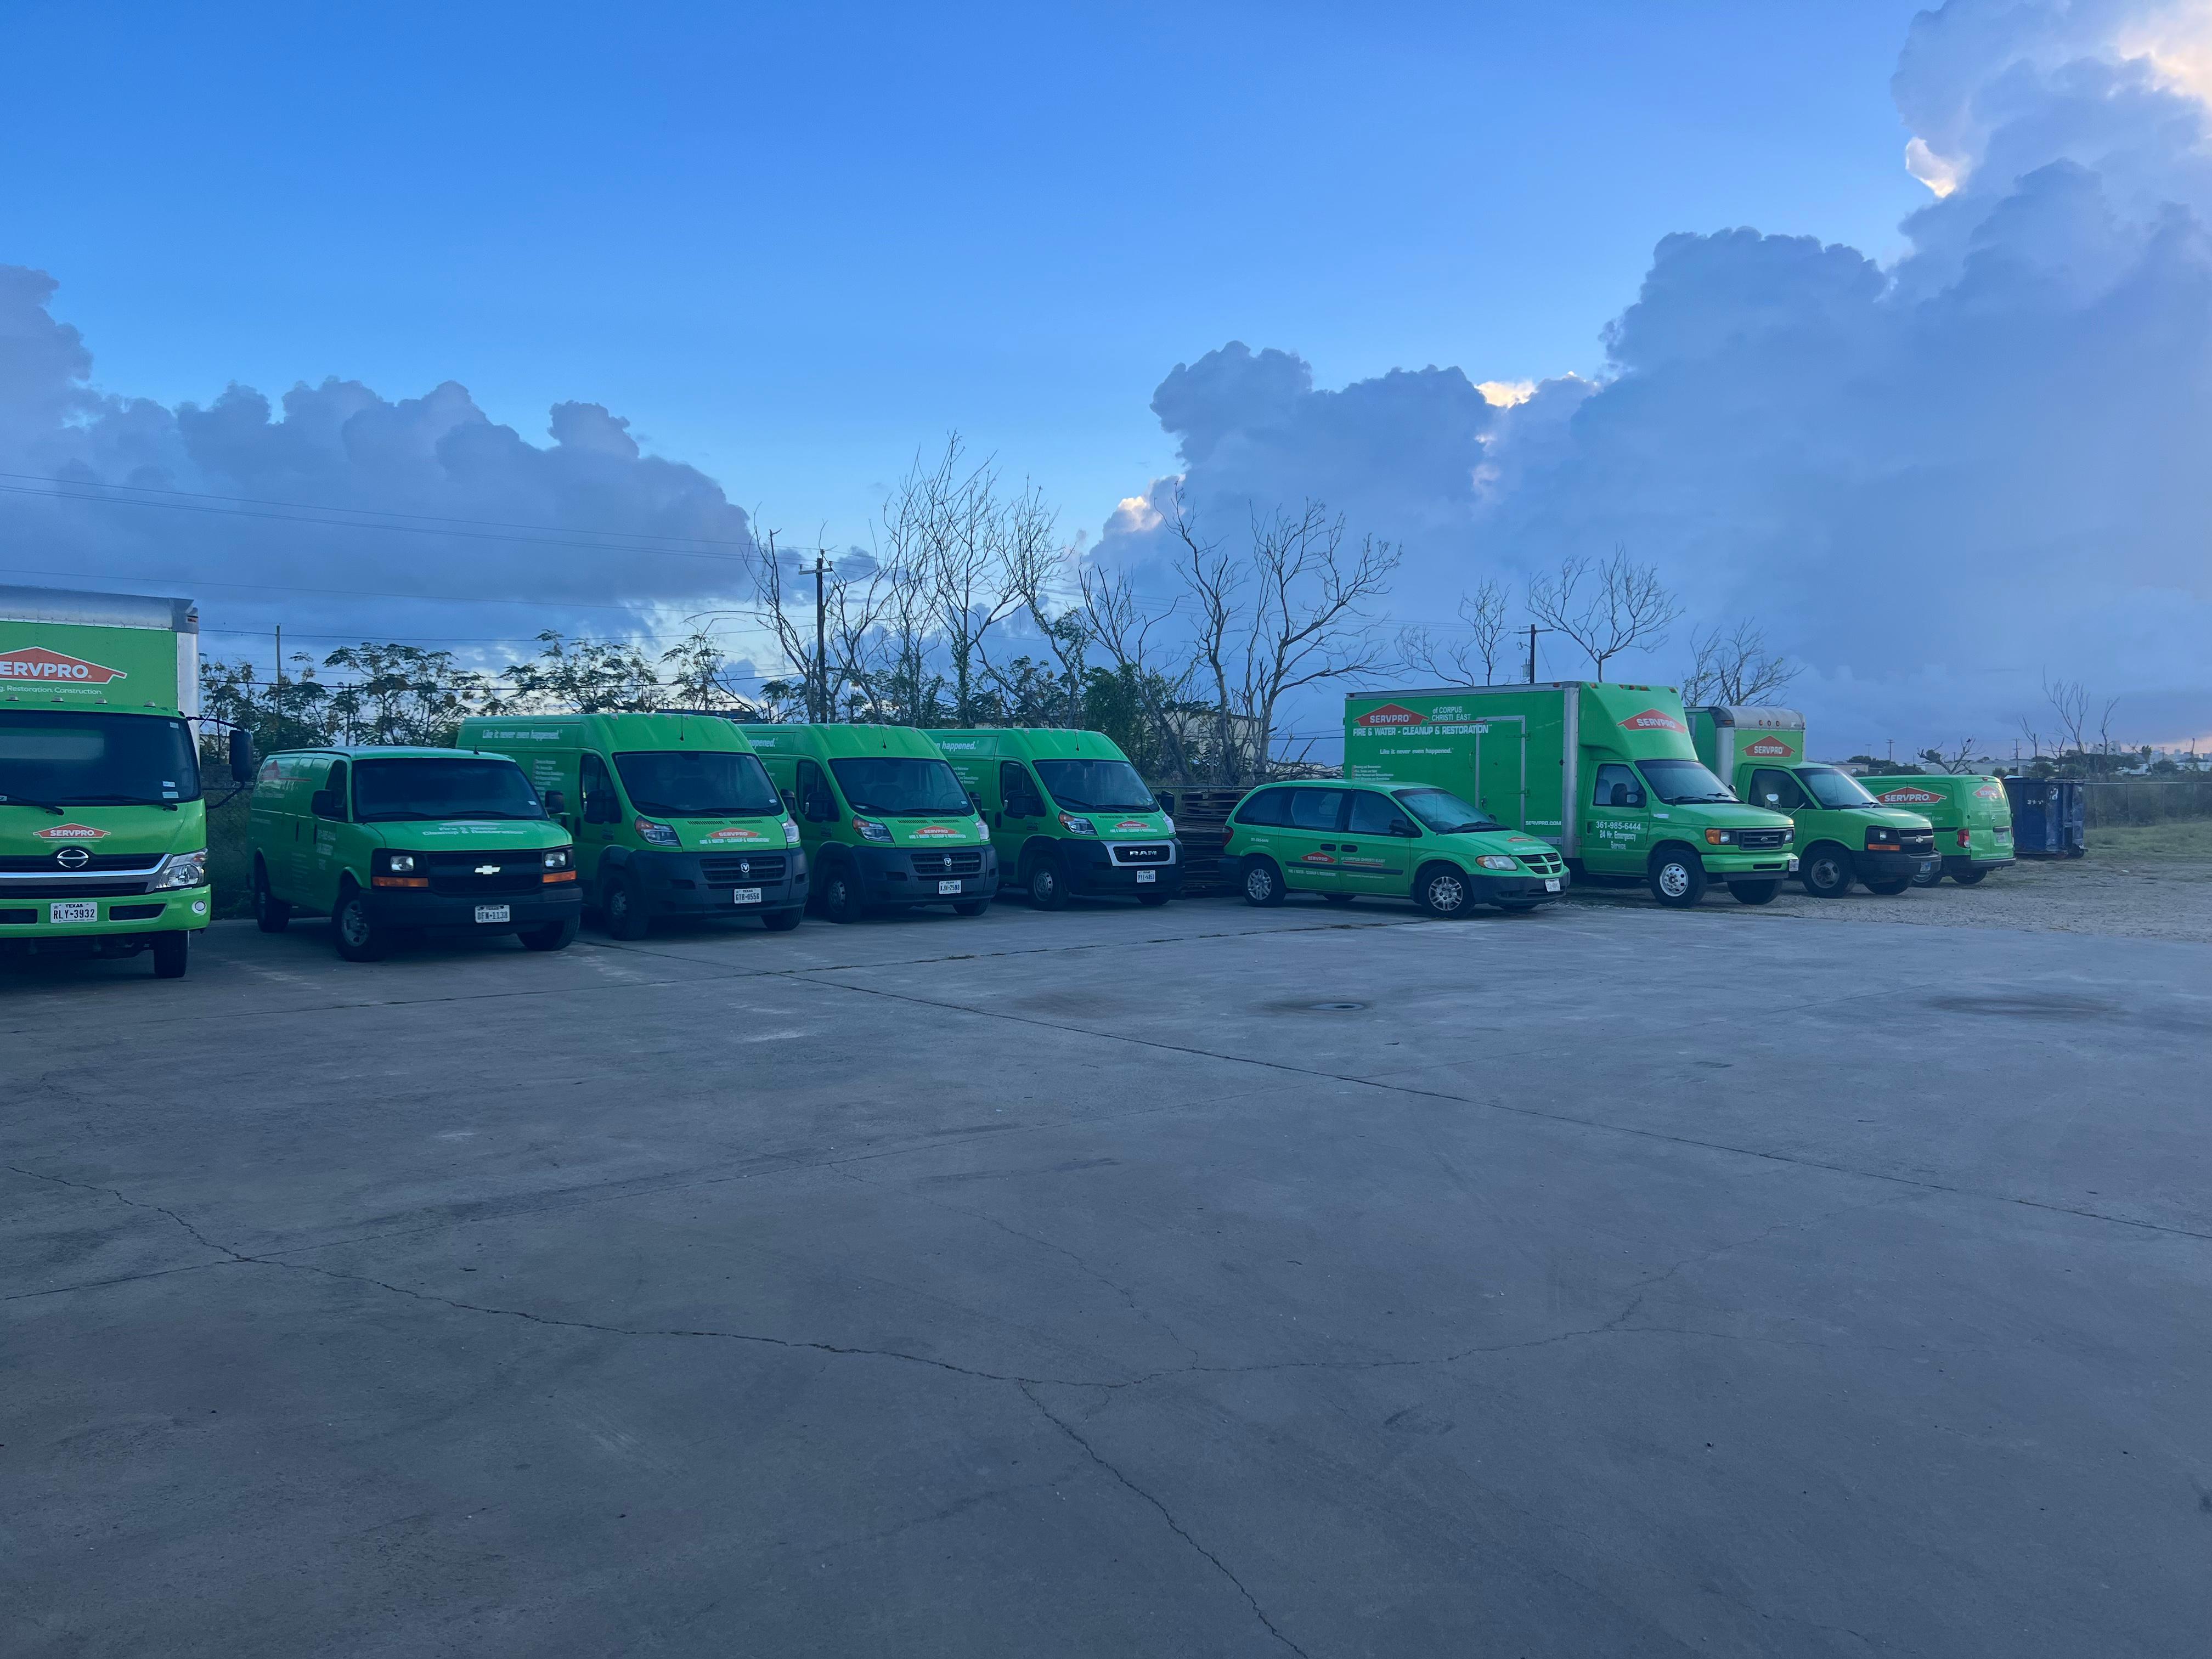 Some jobs are bigger than others.  A whole fleet of SERVPRO vehicles lined up at this job site.